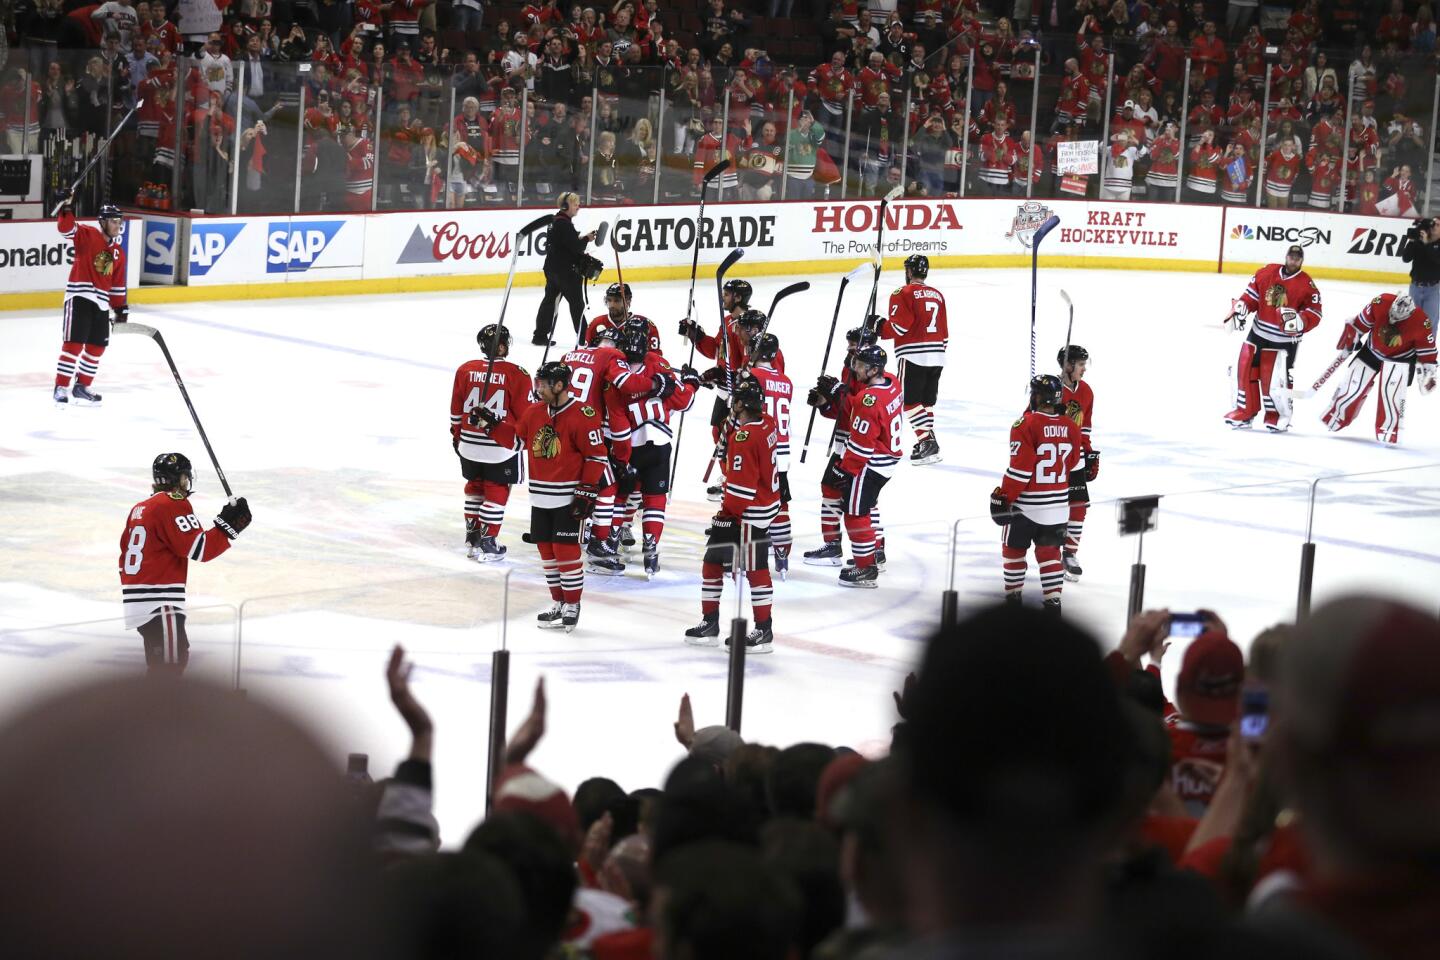 Patrick Kane and teammates after their 4-1 win.